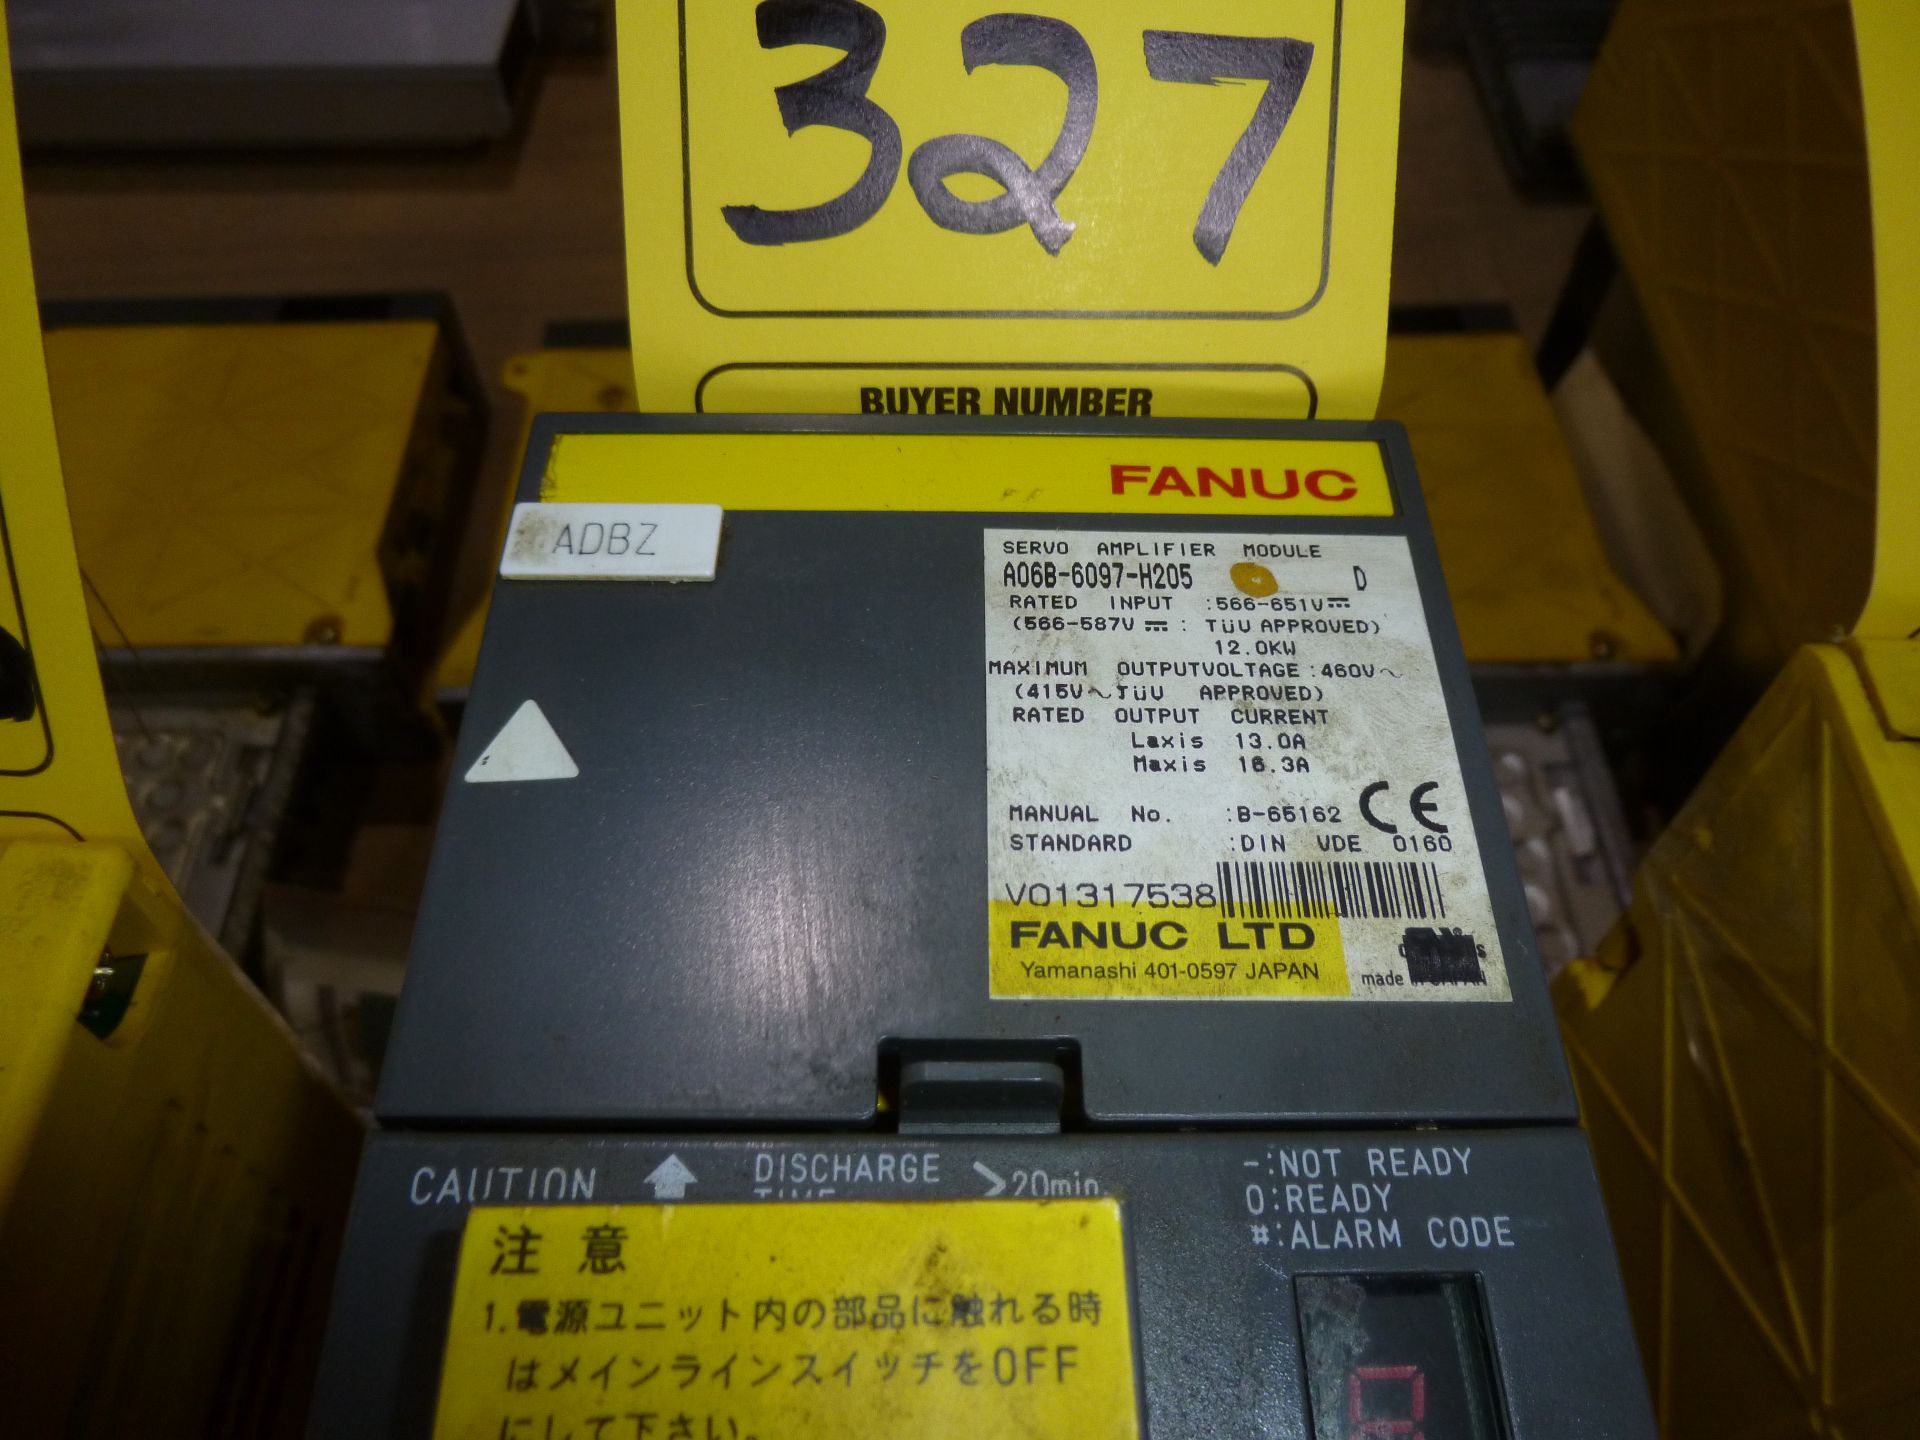 Fanuc servo amplifier module model A06B-6097-H205, as always with Brolyn LLC auctions, all lots - Image 2 of 2